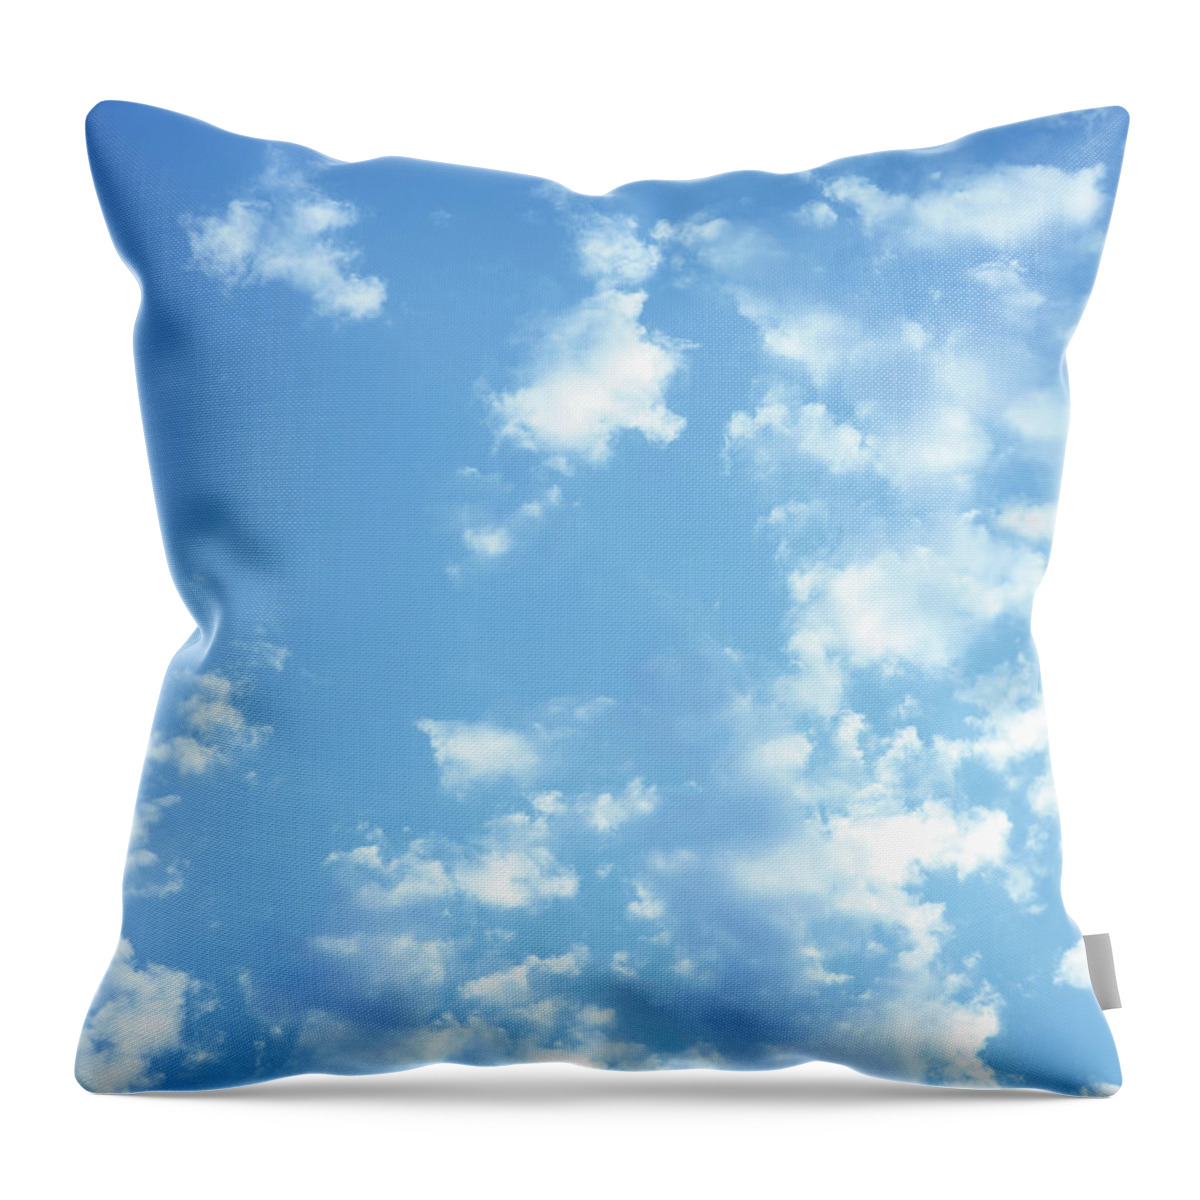 Outdoors Throw Pillow featuring the photograph Cumulus Clouds In Sky by Steven Errico